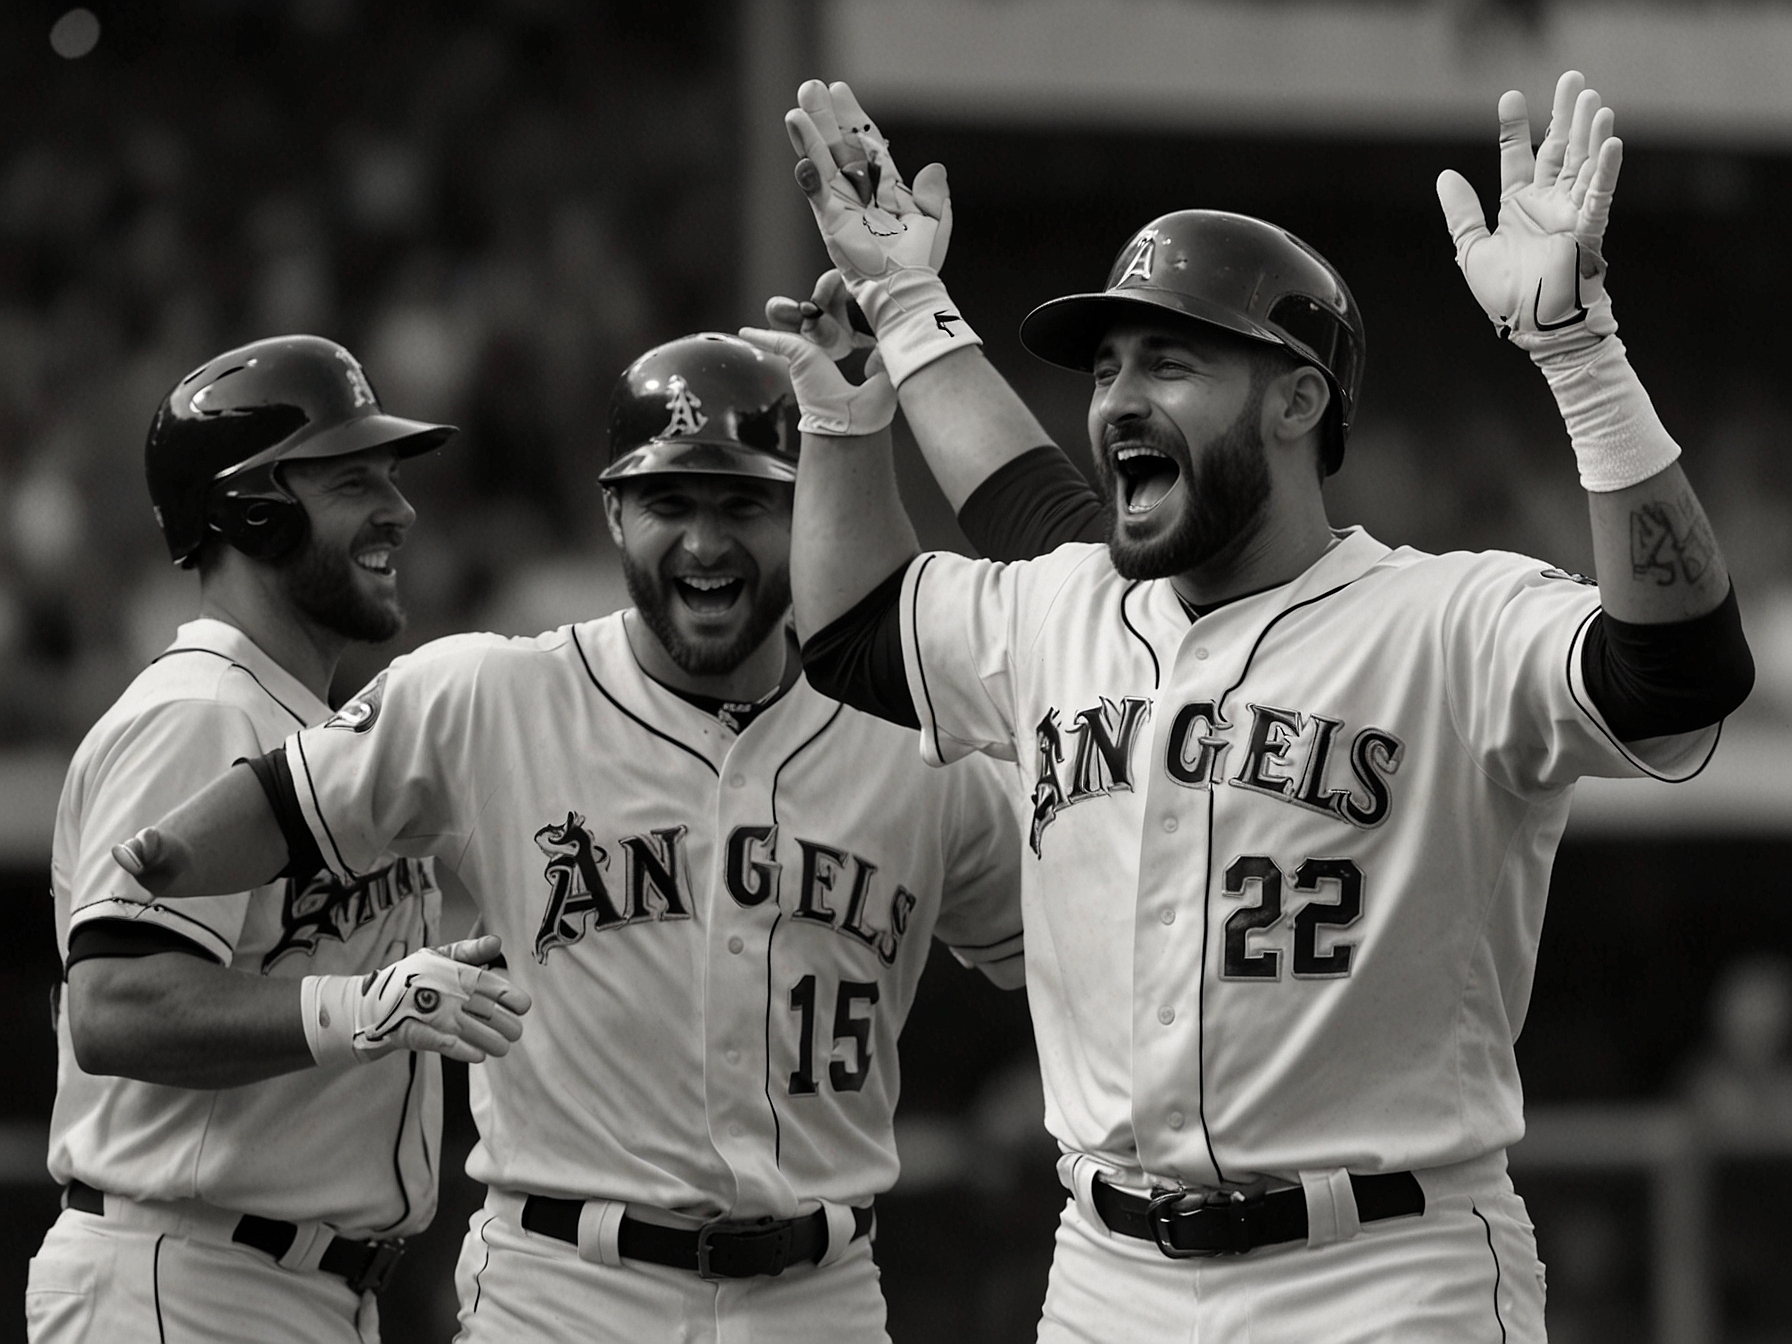 Kevin Pillar celebrates with teammates after hitting the game-winning single in the 10th inning, securing the Los Angeles Angels' 6-5 victory over the Detroit Tigers at Angel Stadium.